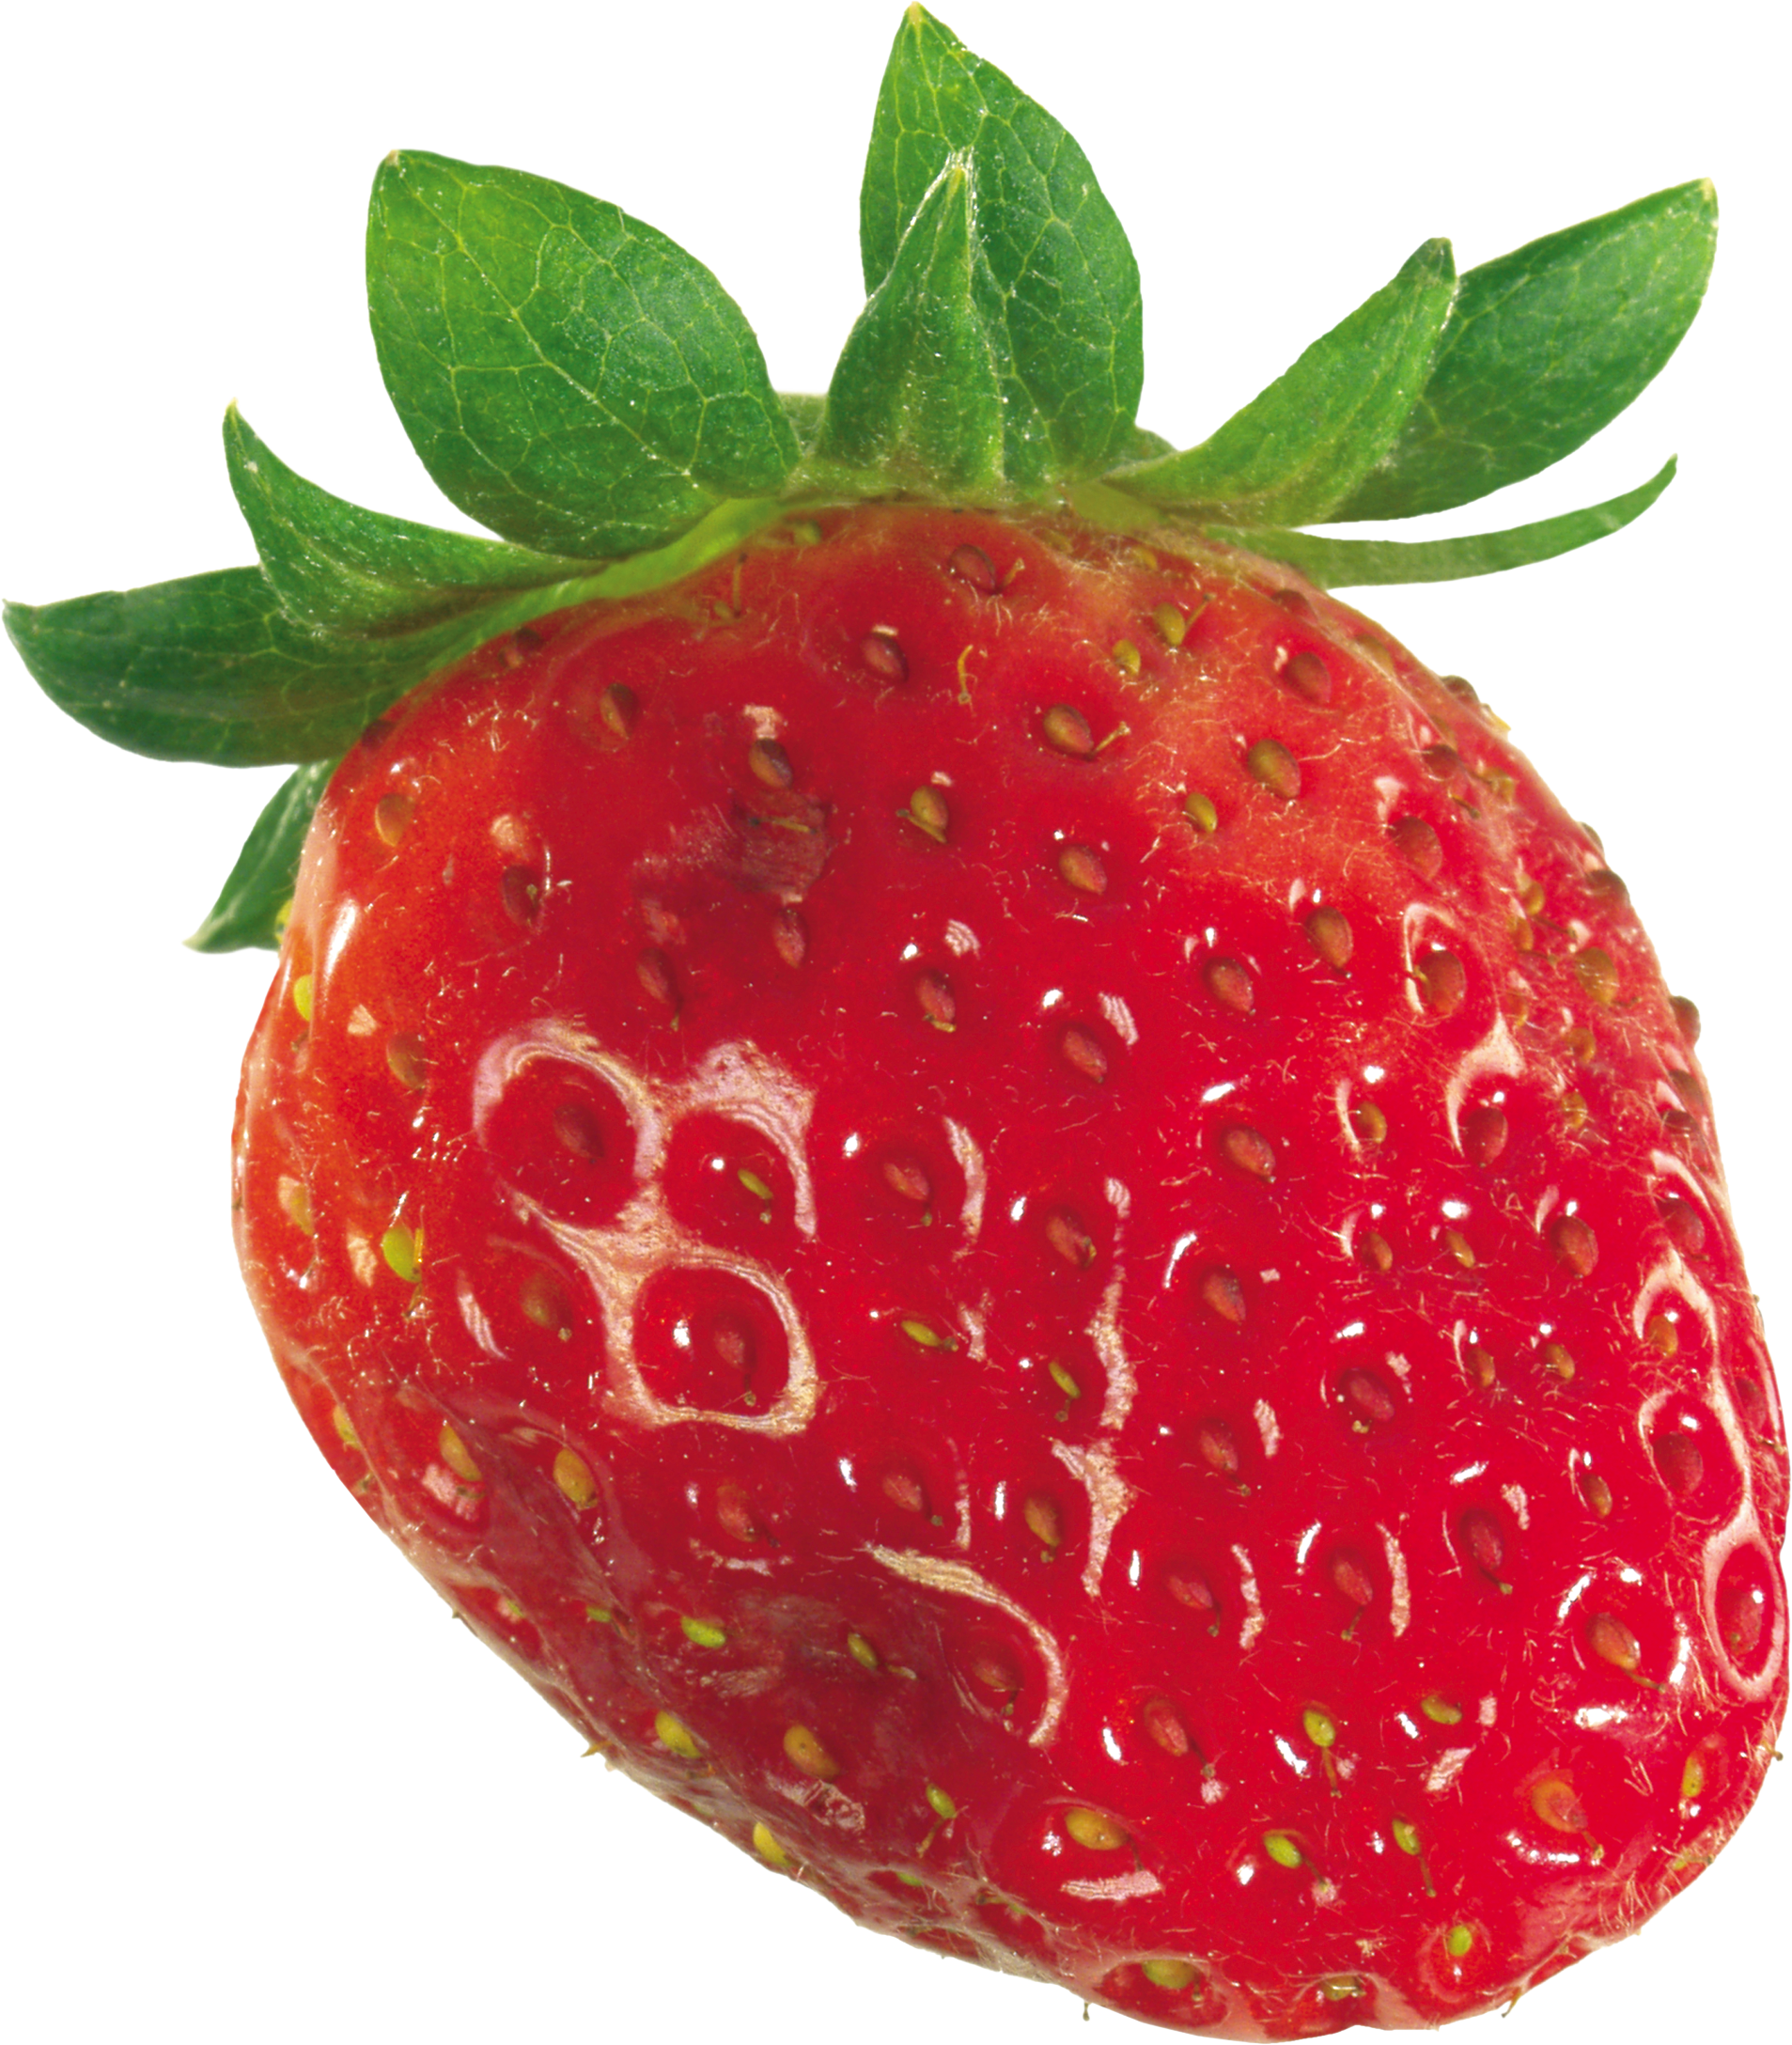 Red strawberry PNG image